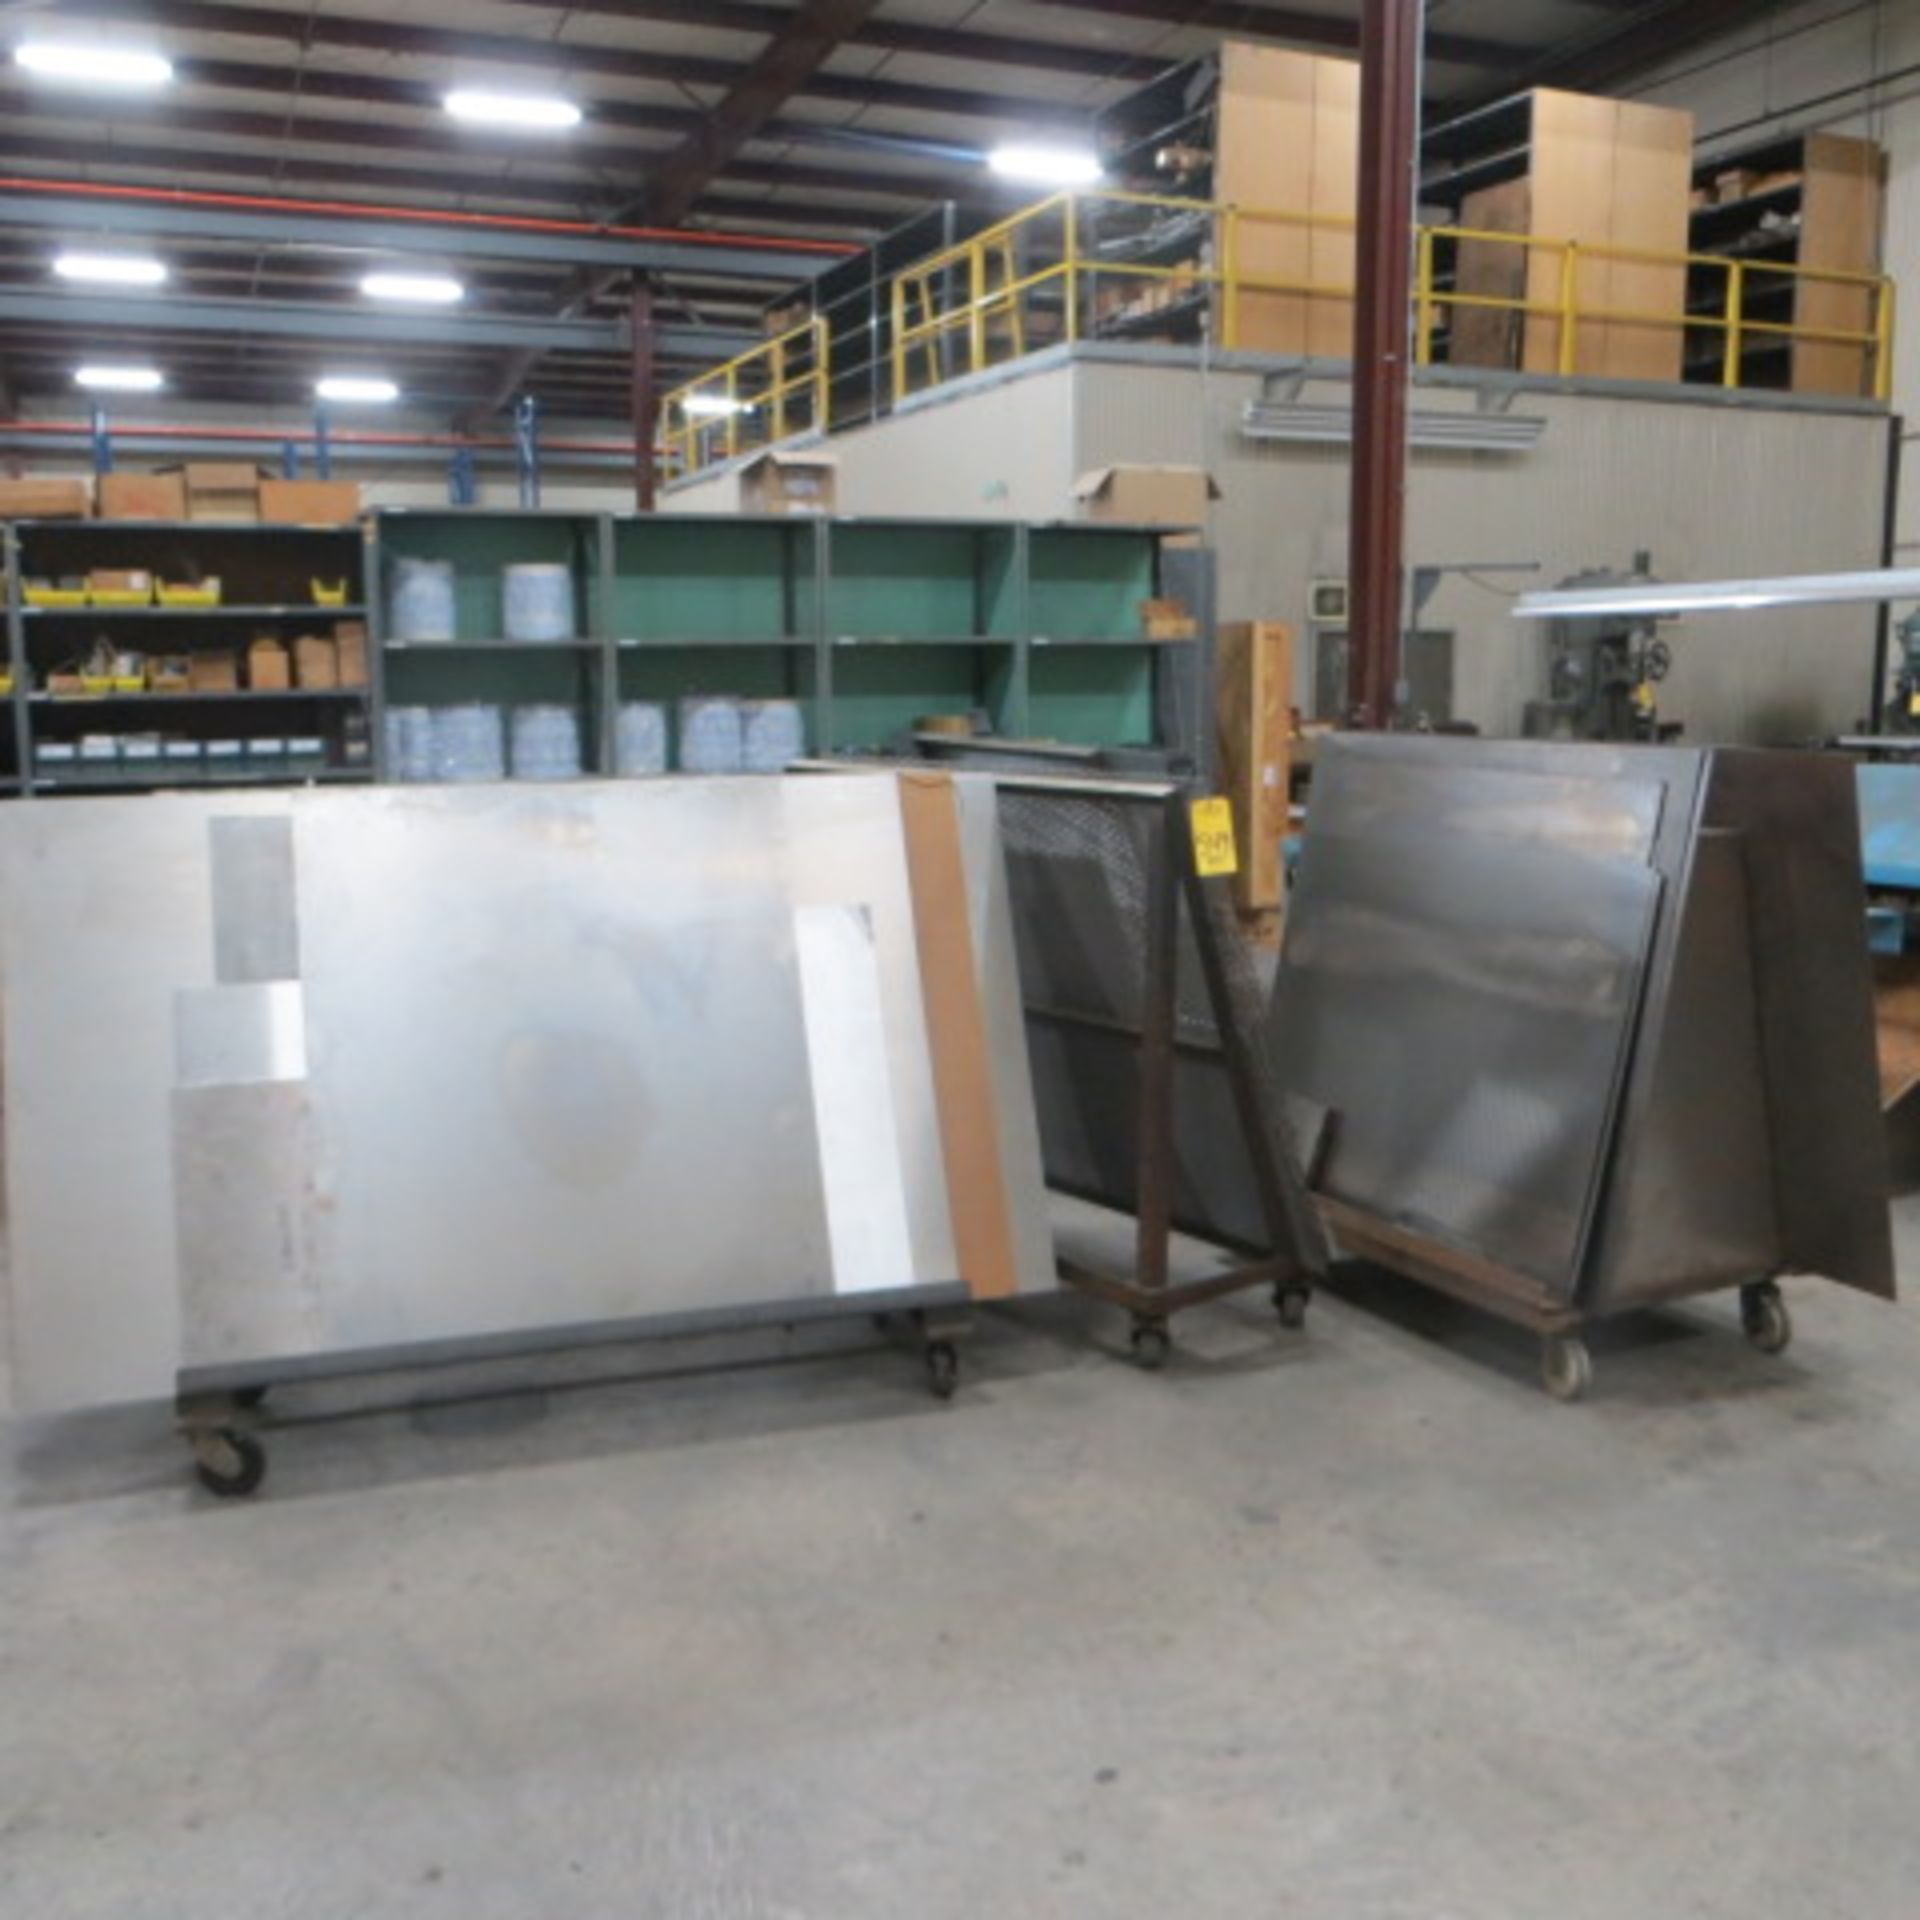 (4) STEEL A-FRAME CARTS W/ASSORTED SHEET MATERIAL